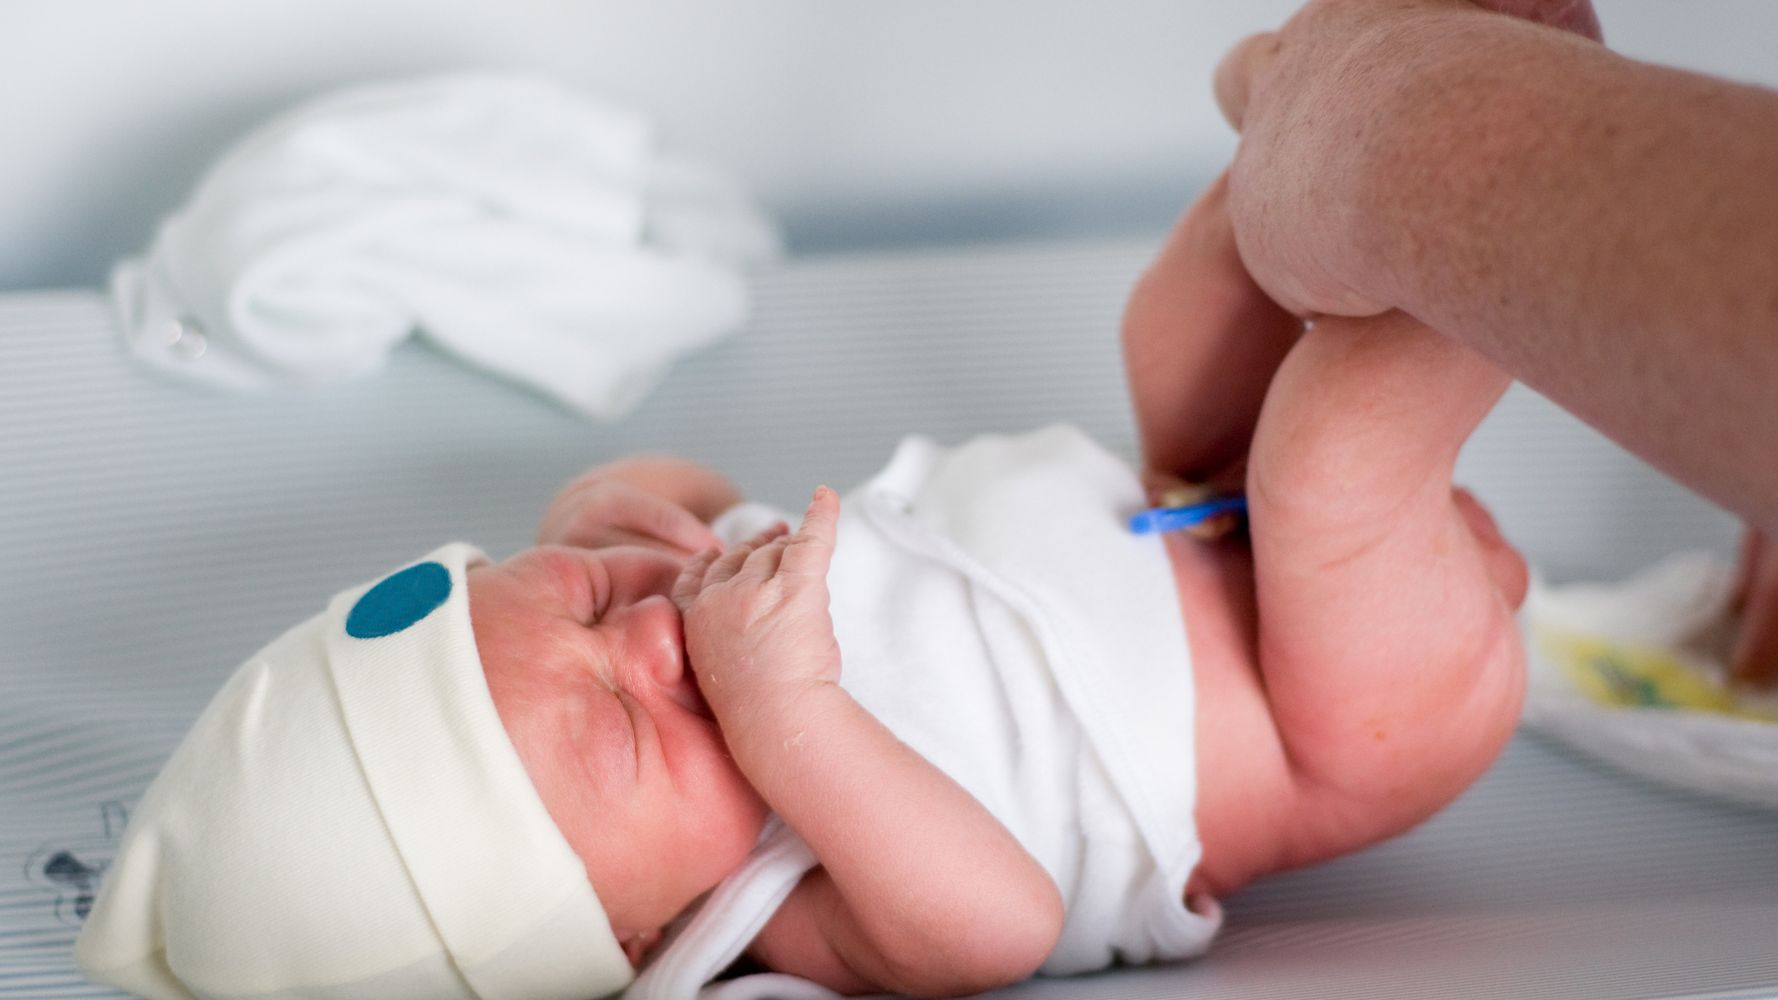 When Does Baby Develop Umbilical Cord?